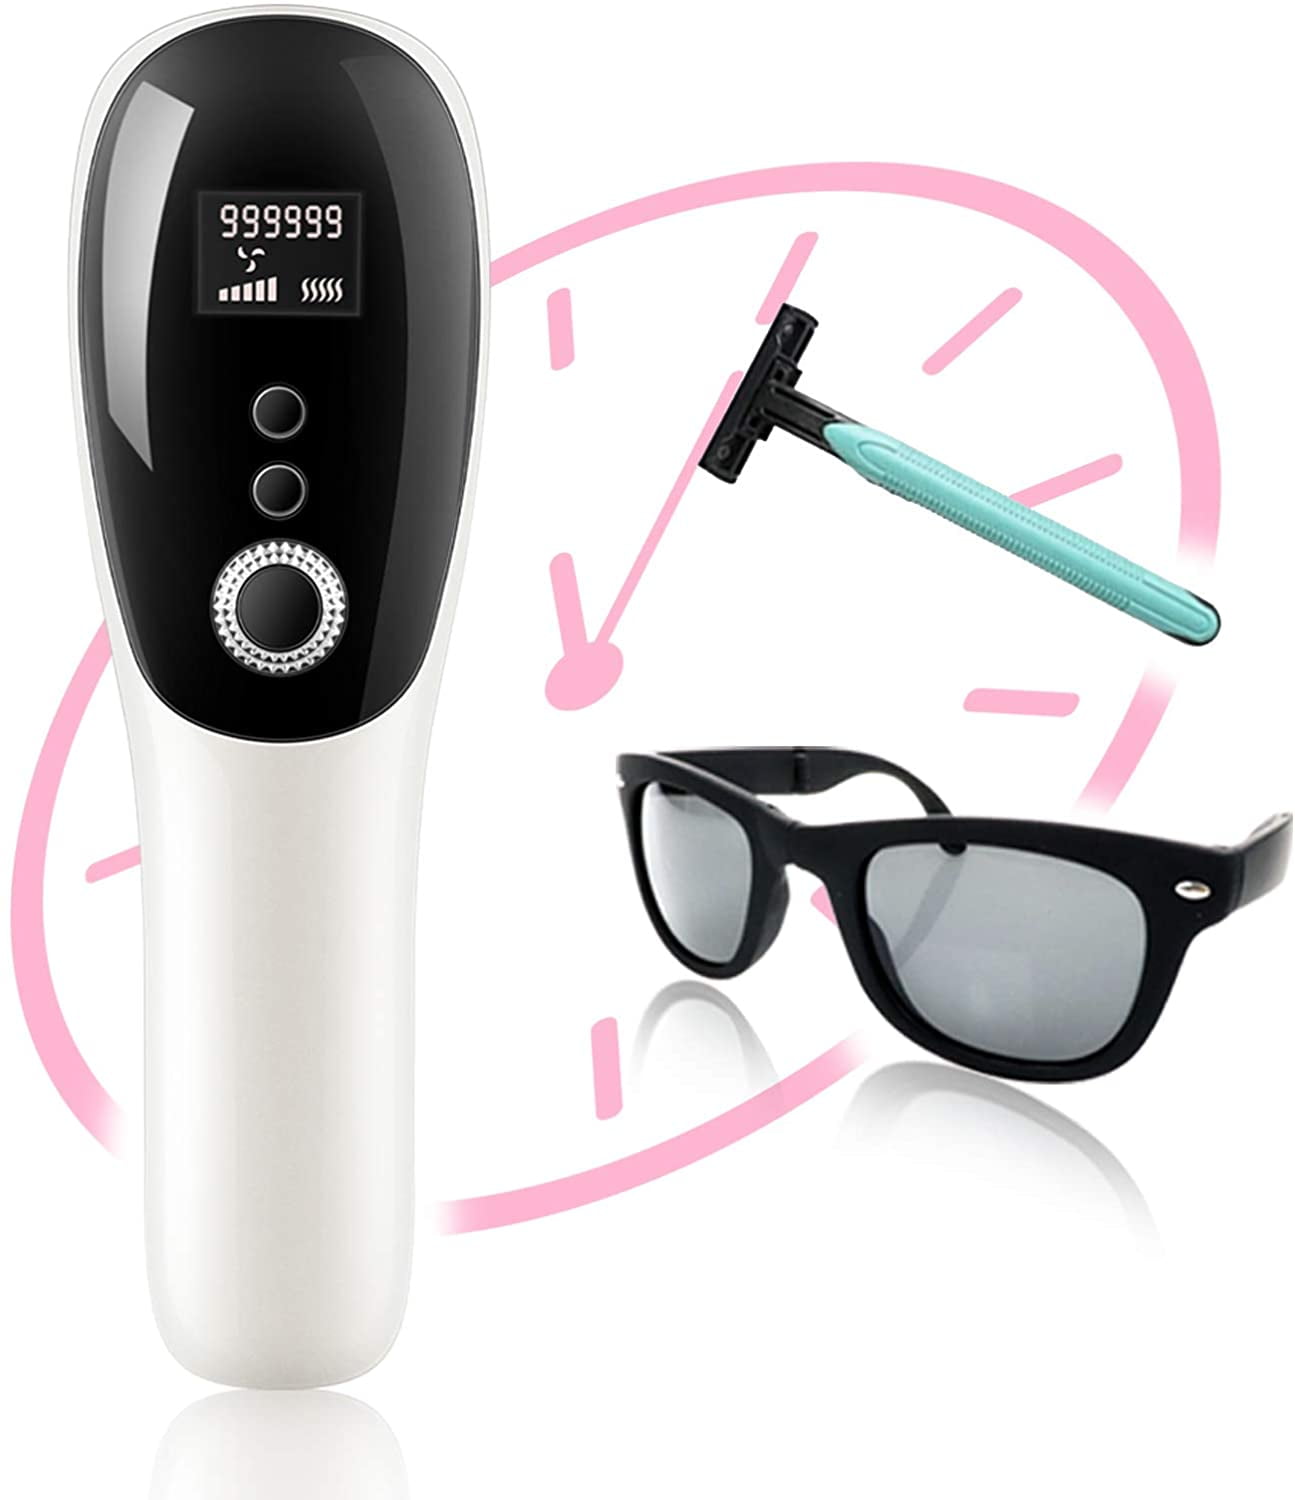 YAFAN Laser Hair Removal Device,2022 latest version 990,000 times household  5-speed adjustment waste hair care men's beards and women's VIO compatible  LCD screen full body unisex arm underarm 